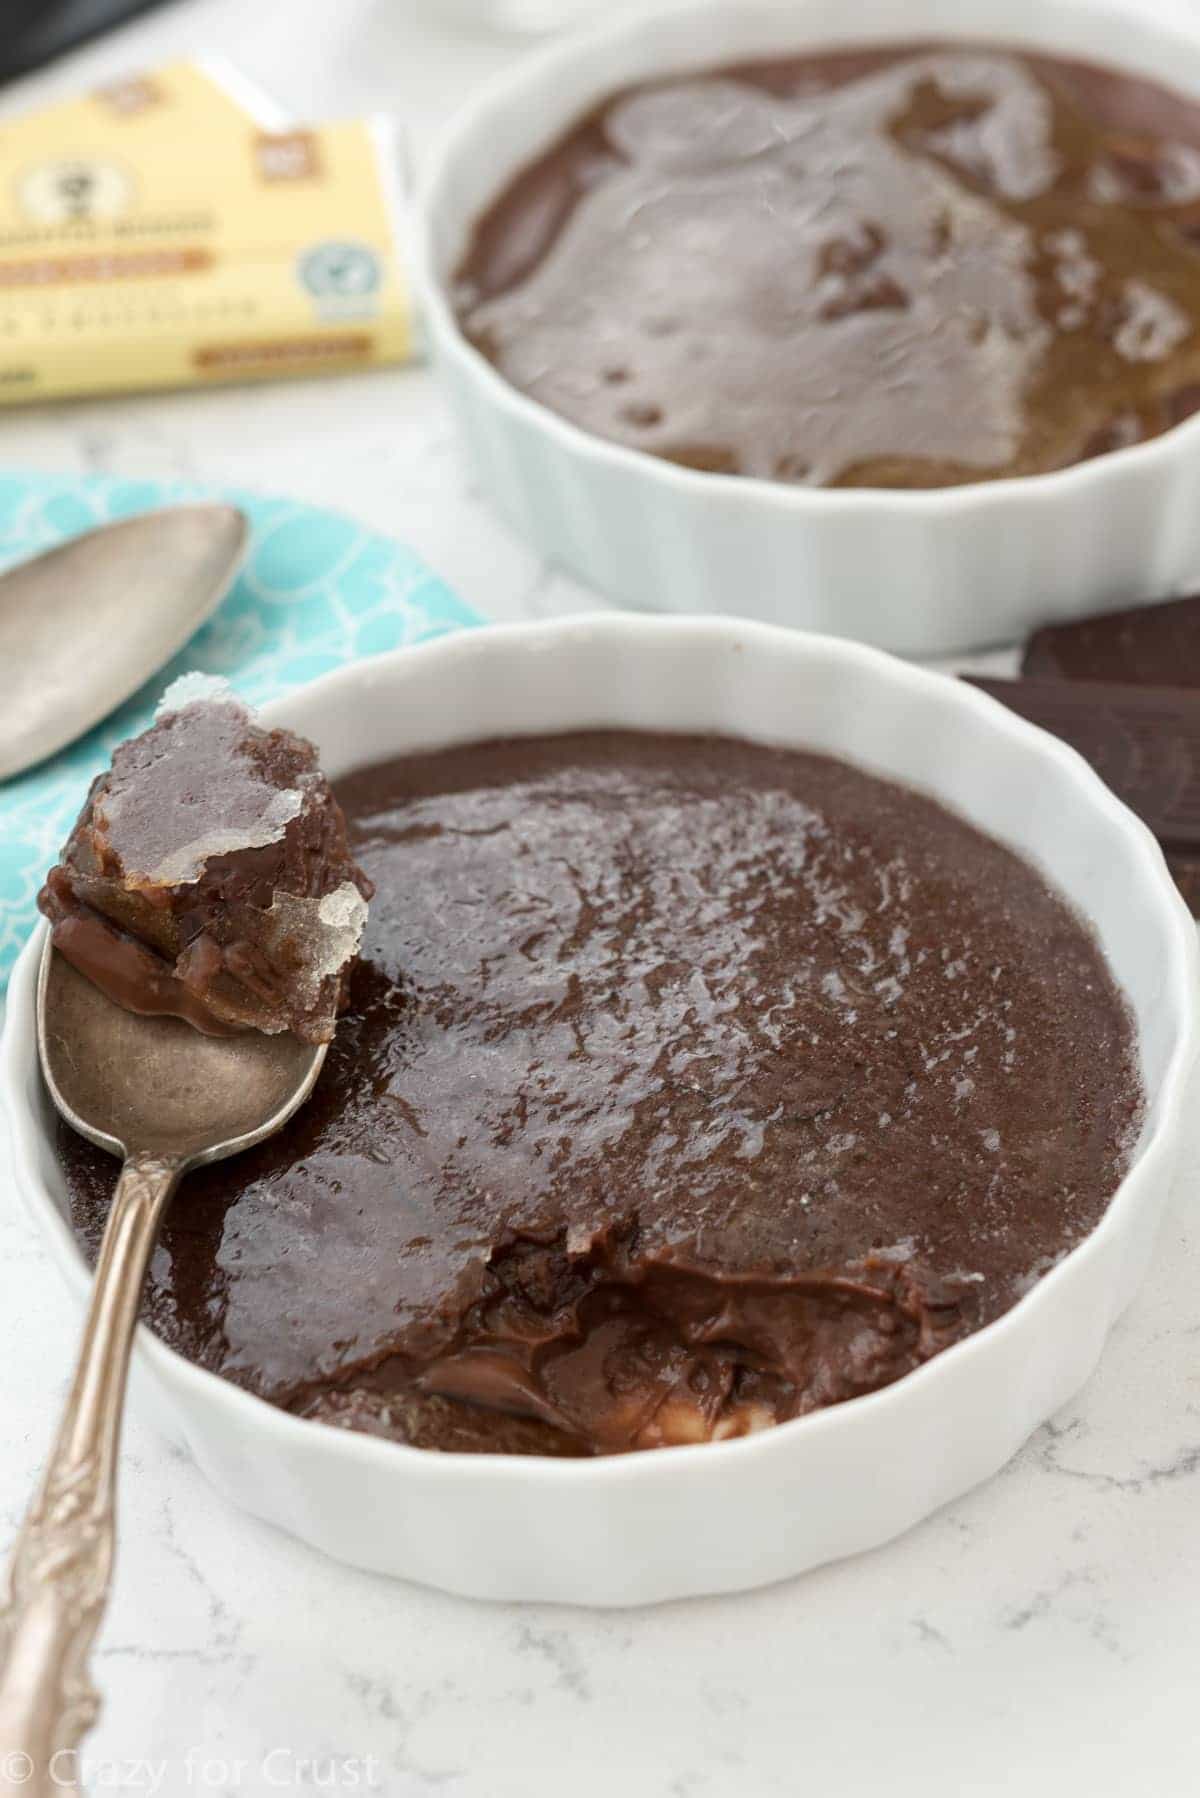 Easy Chocolate Creme Brulee Recipe - full of chocolate and no bake!